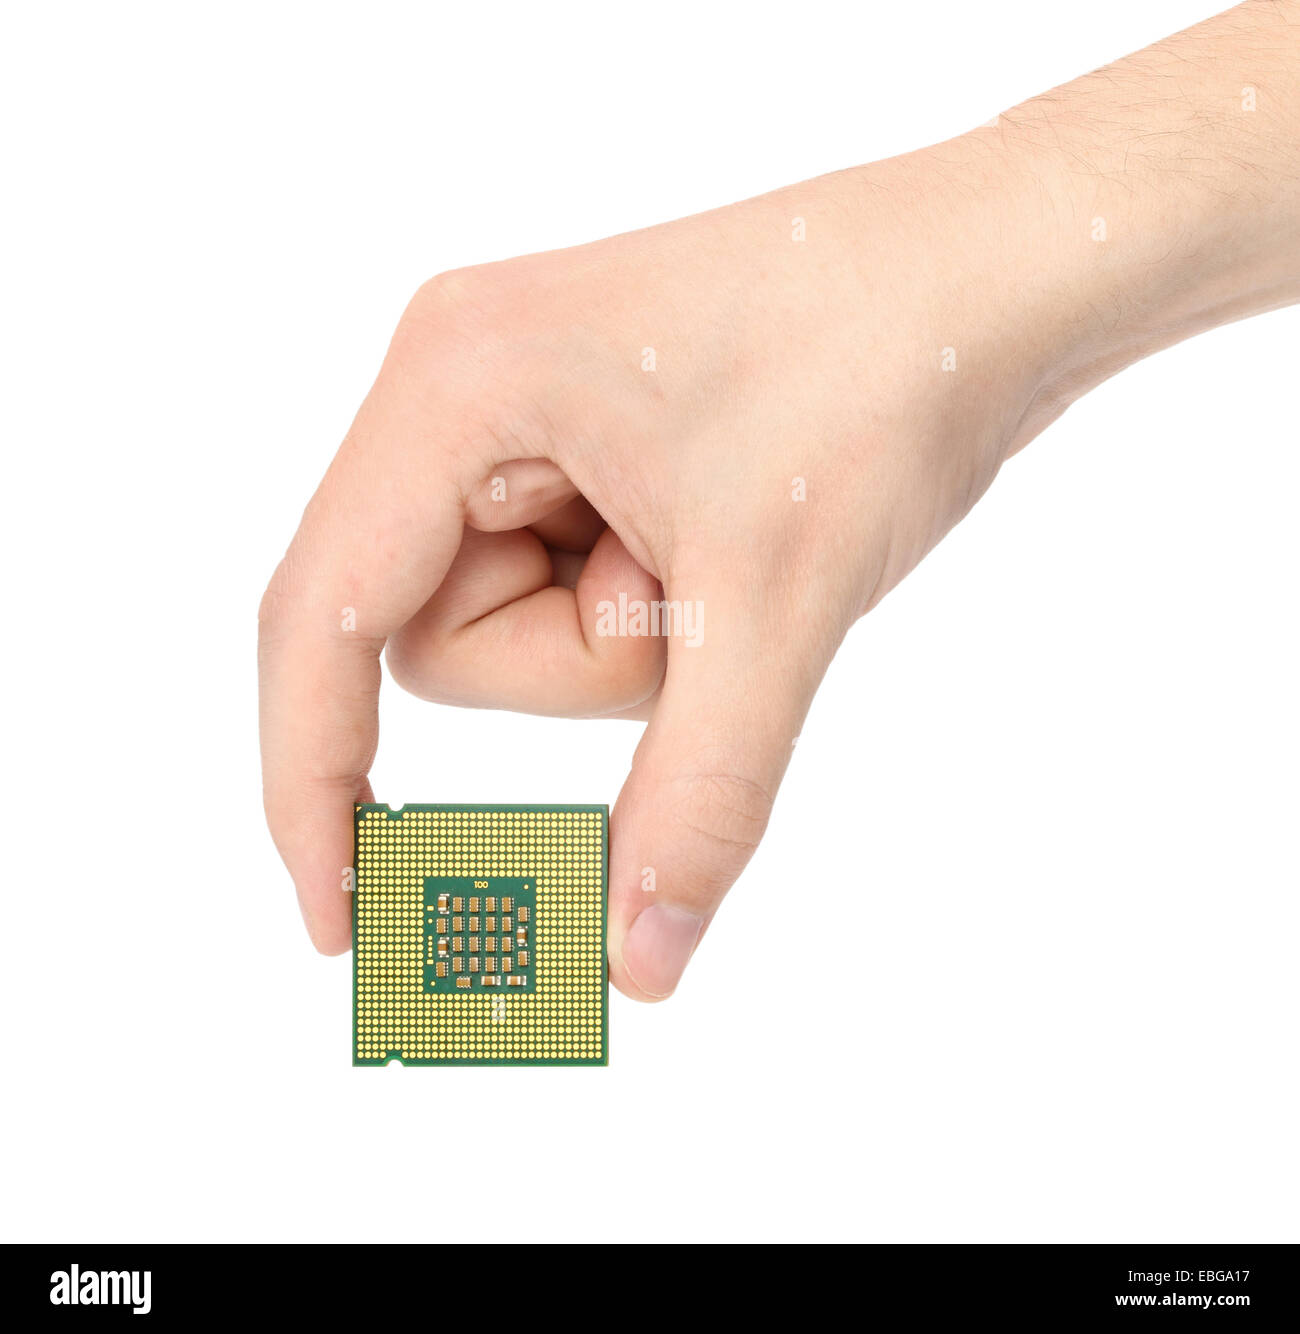 Processor in hand on white background isolate Stock Photo